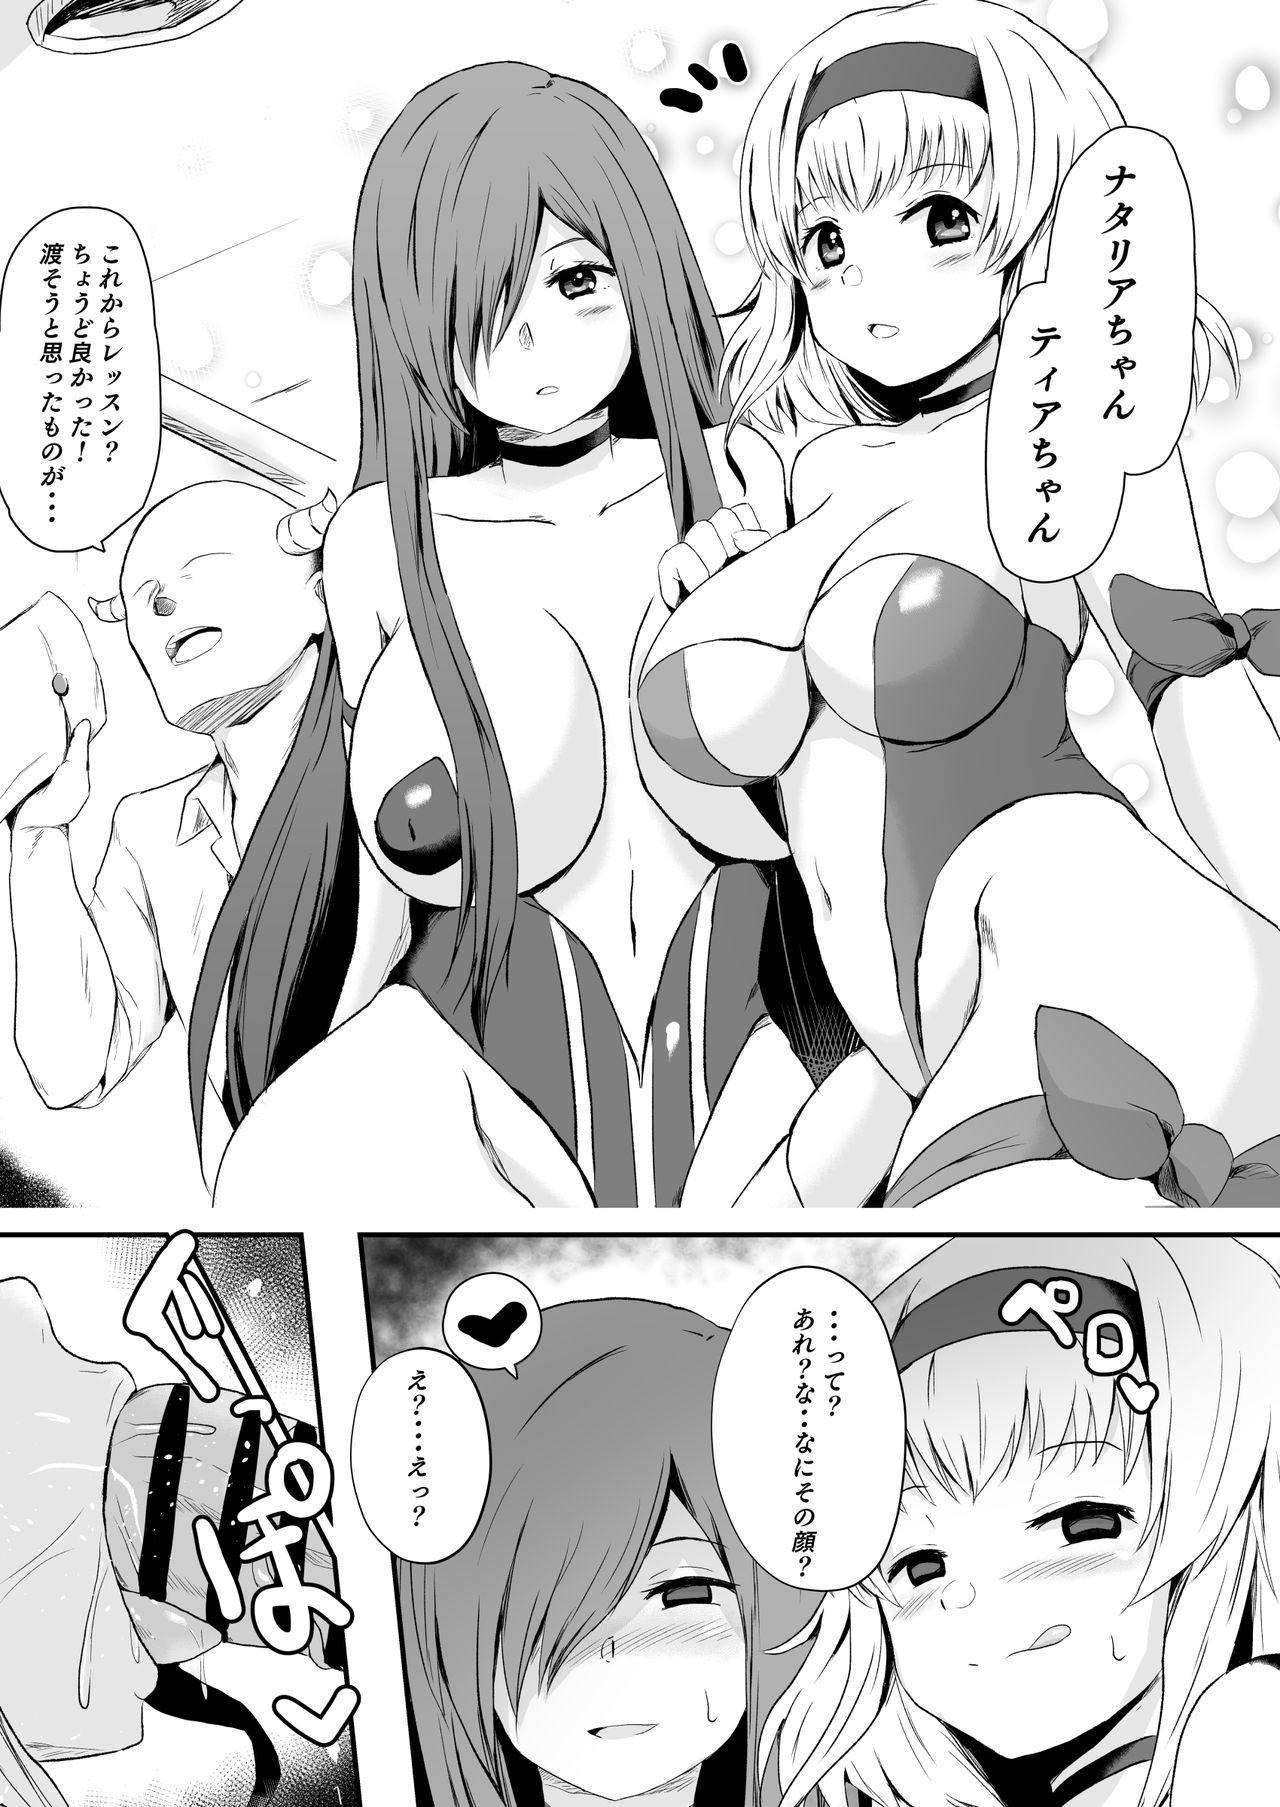 Hair LOVE Tales e Youkoso - Tales of vesperia Big Ass - Page 11